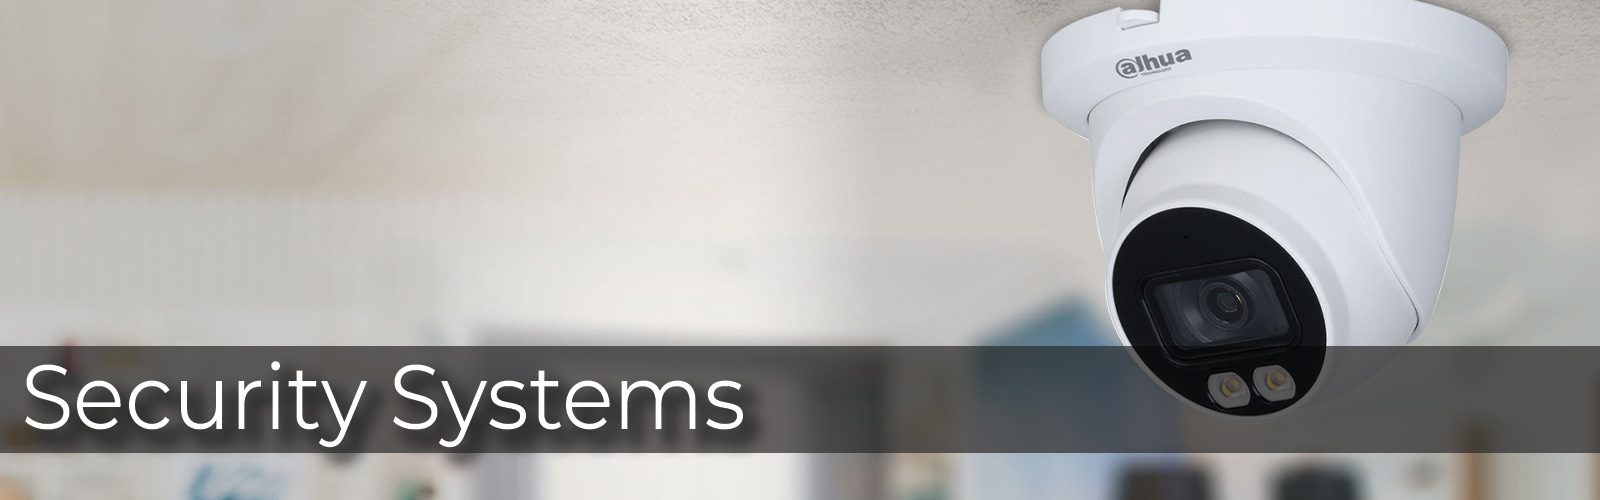 Security-Systems-Banner